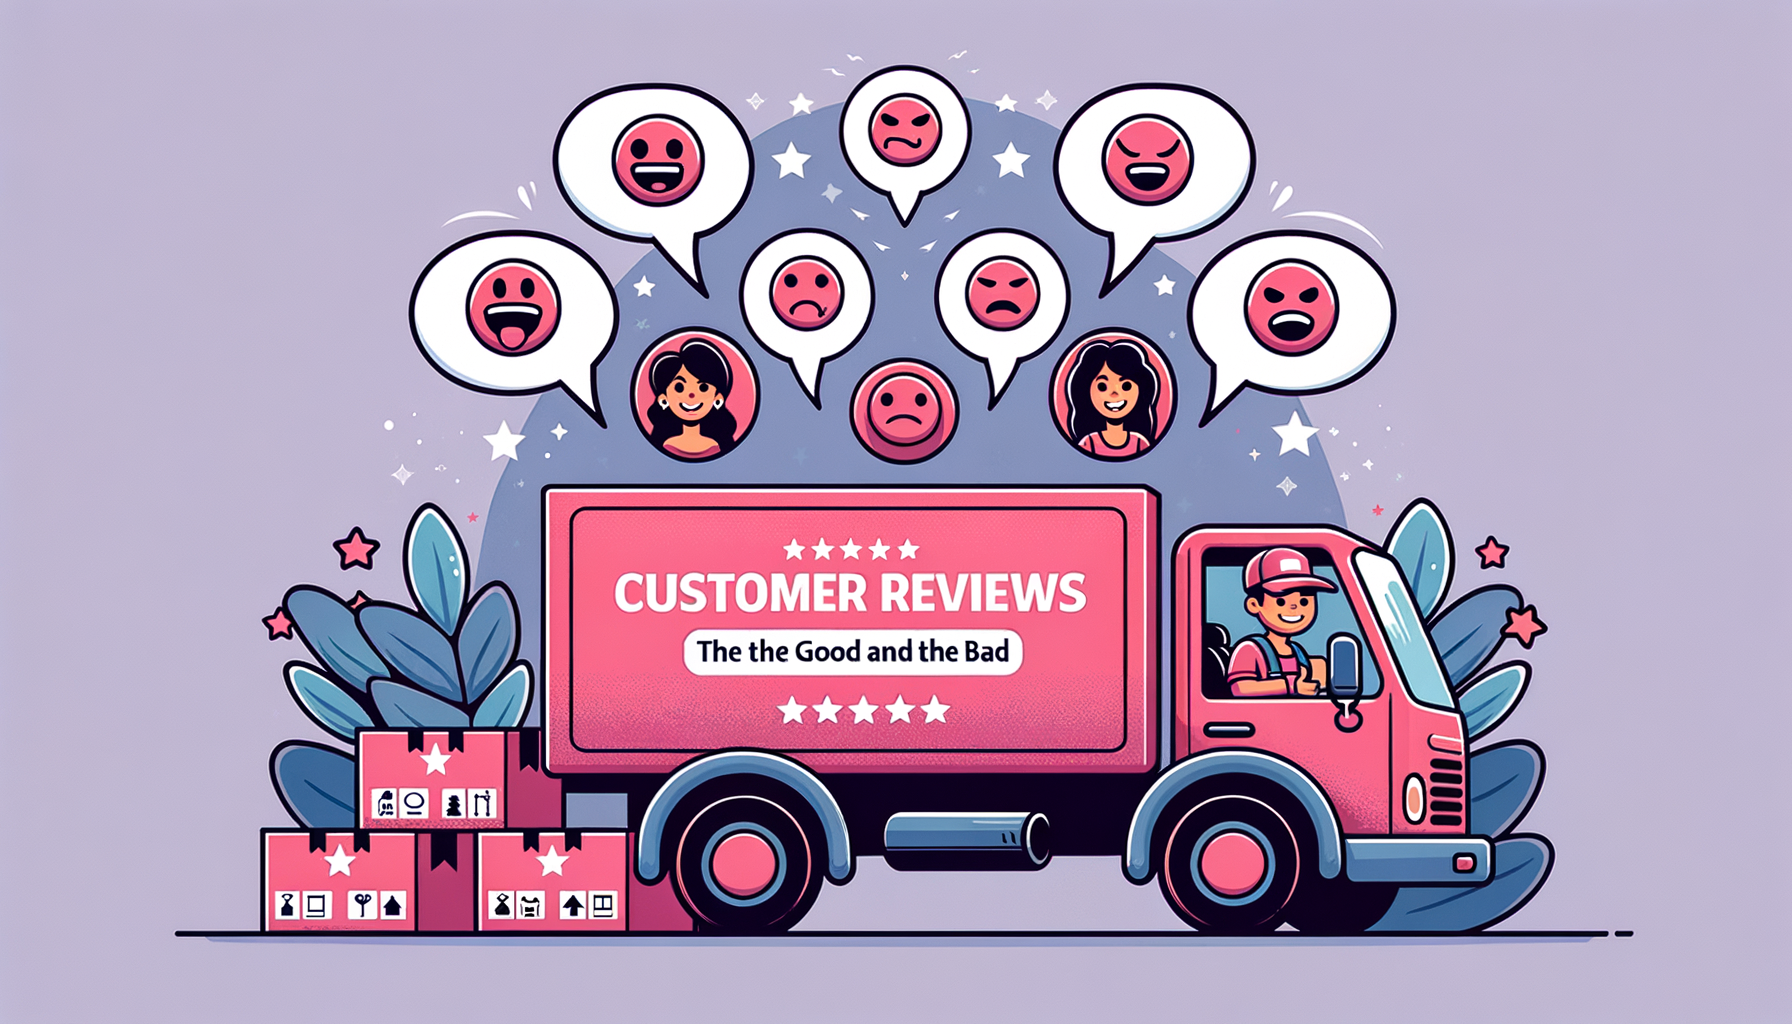 A cartoon-like fuschia colored illustration showcasing positive and negative customer reviews with speech bubbles, a moving truck with the Mayflower logo, and emotive faces representing different customer experiences.